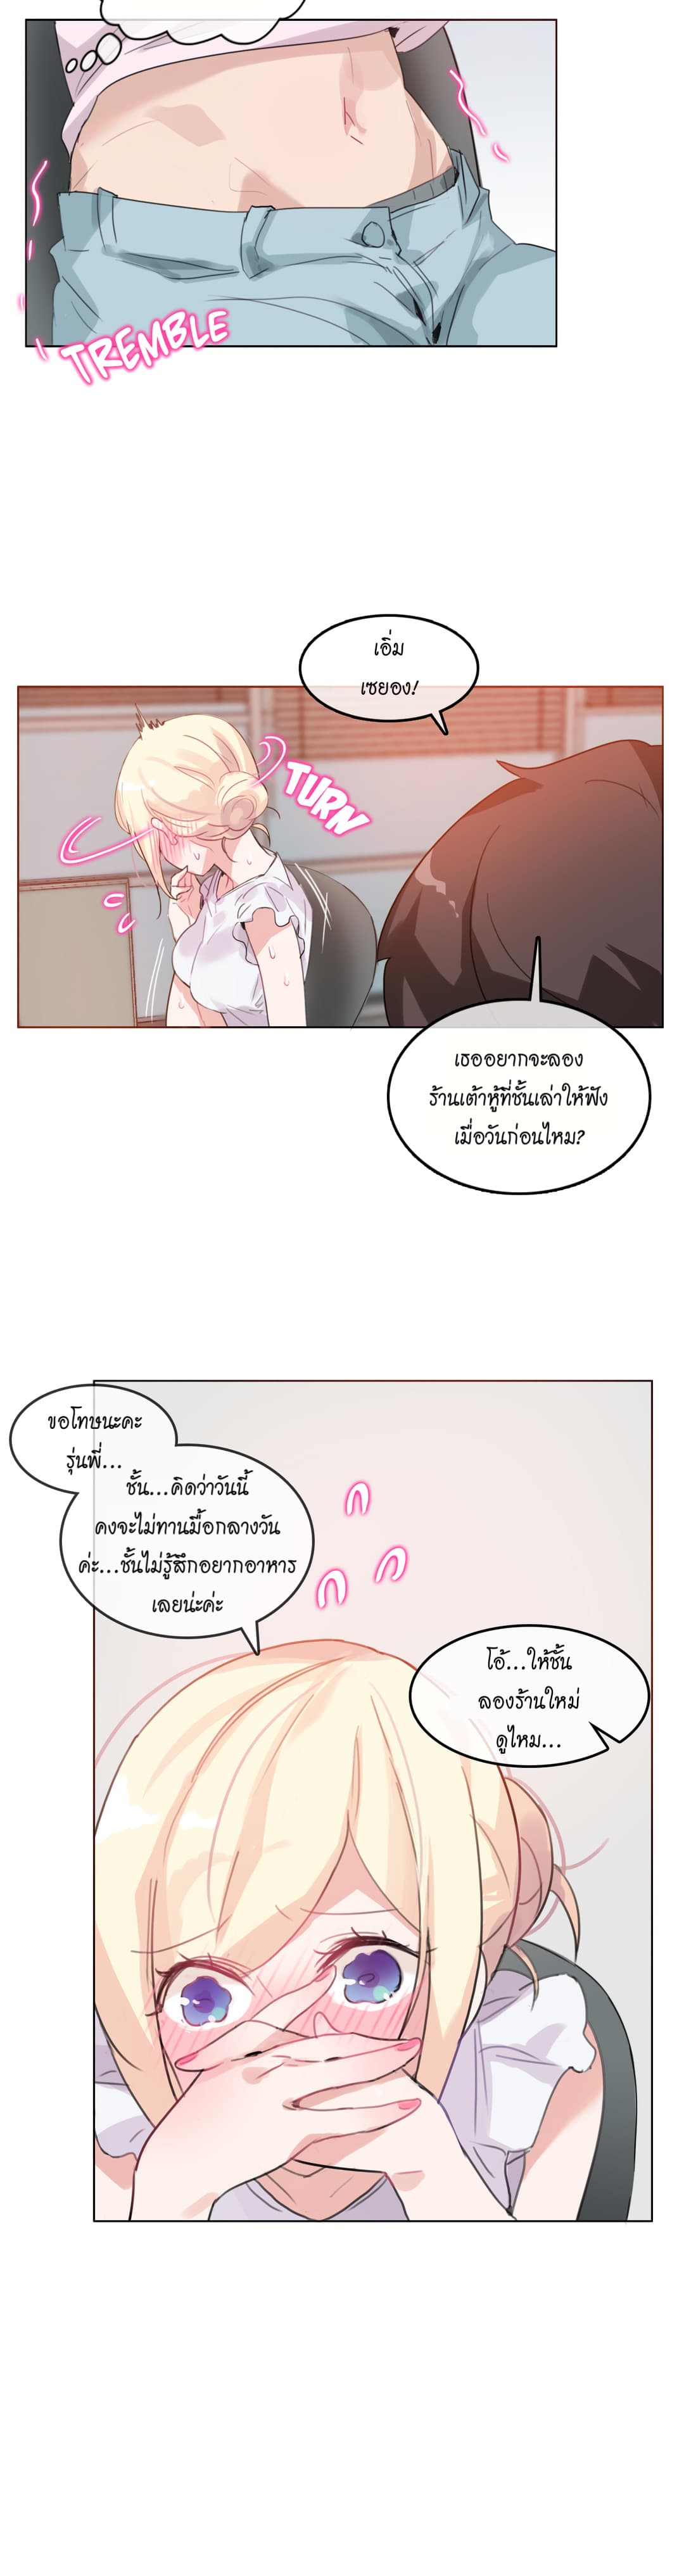 A Pervert’s Daily Life 16 (6)